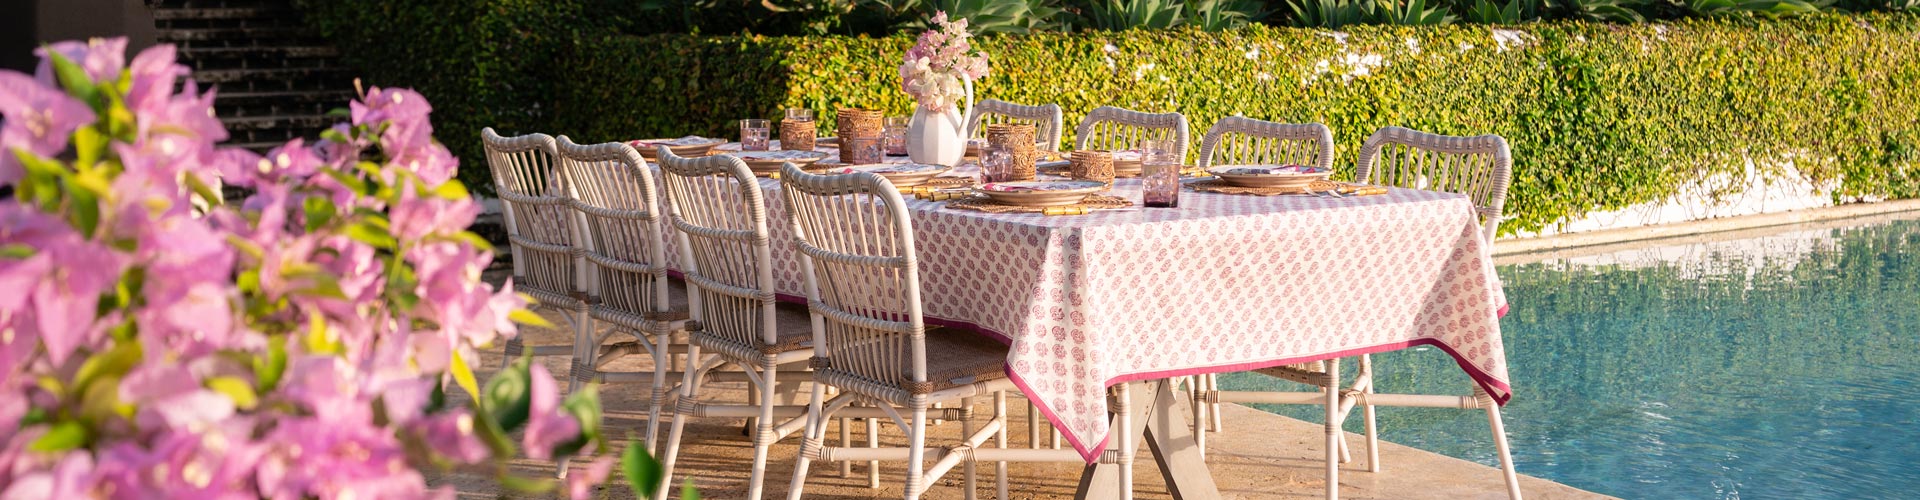 Dusty Pink Rectangle Tablecloth - Take Me Hire